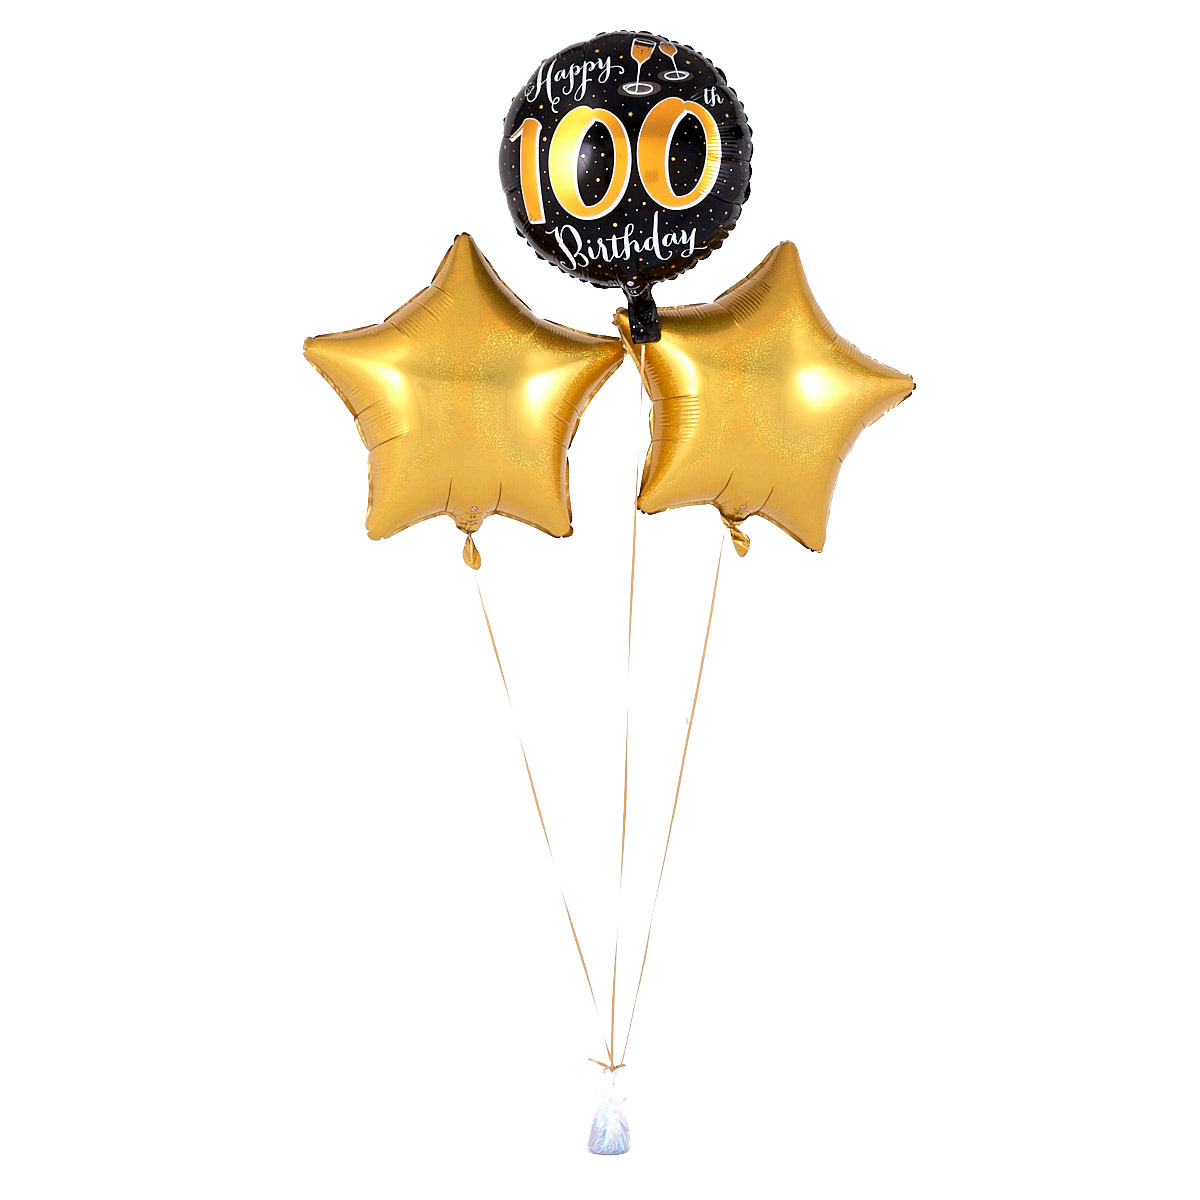 Happy 100th Birthday Gold Balloon Bouquet - DELIVERED INFLATED!